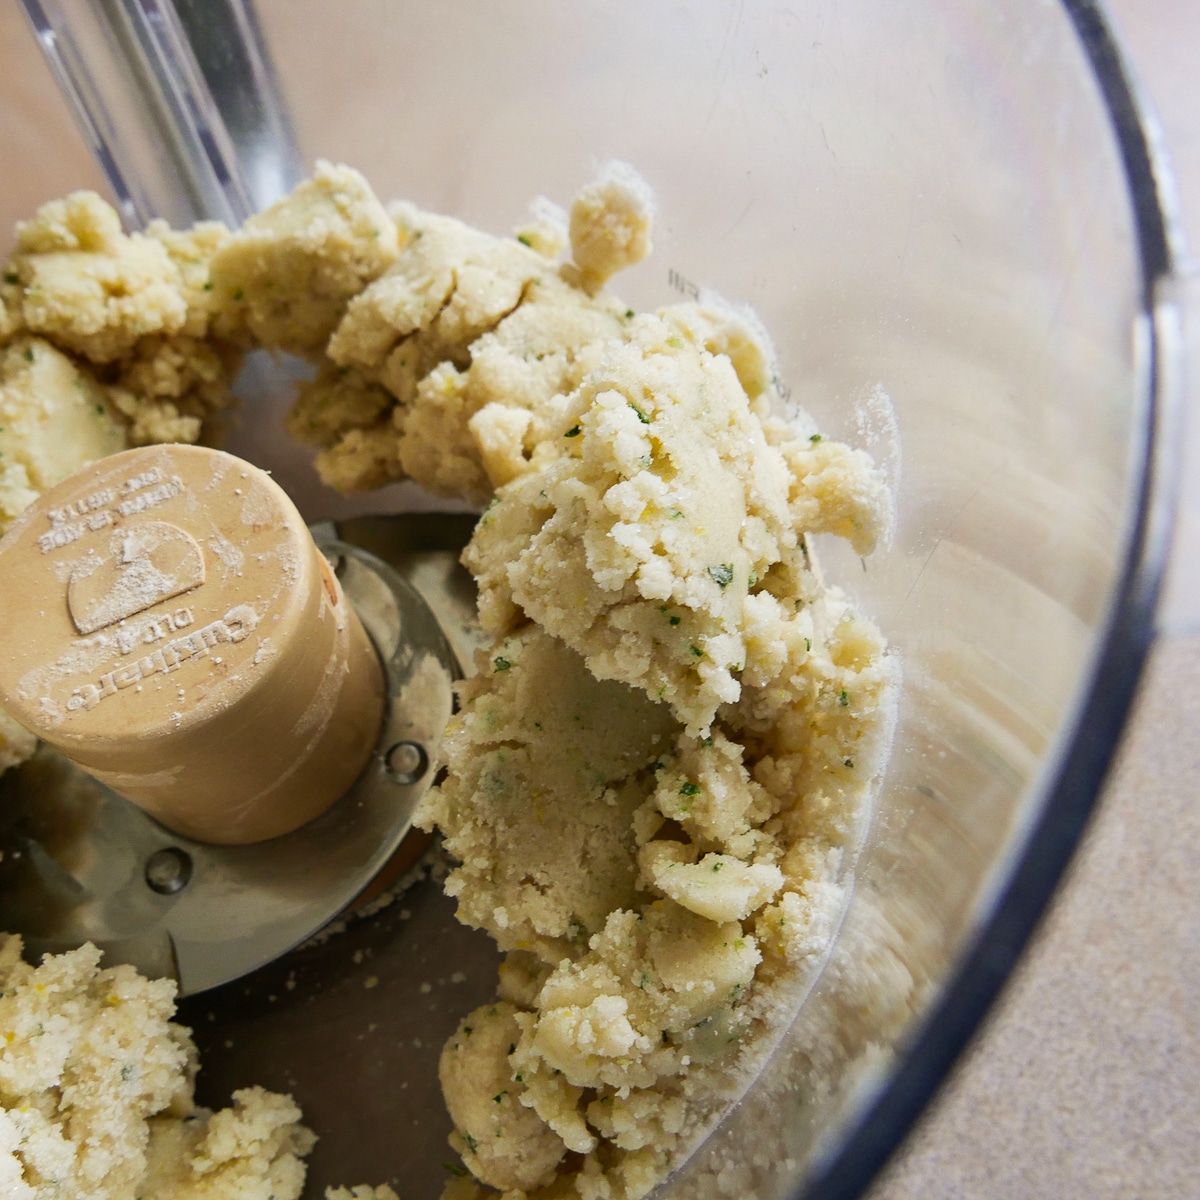 Cookie dough formed into moist clumps in a food processor.